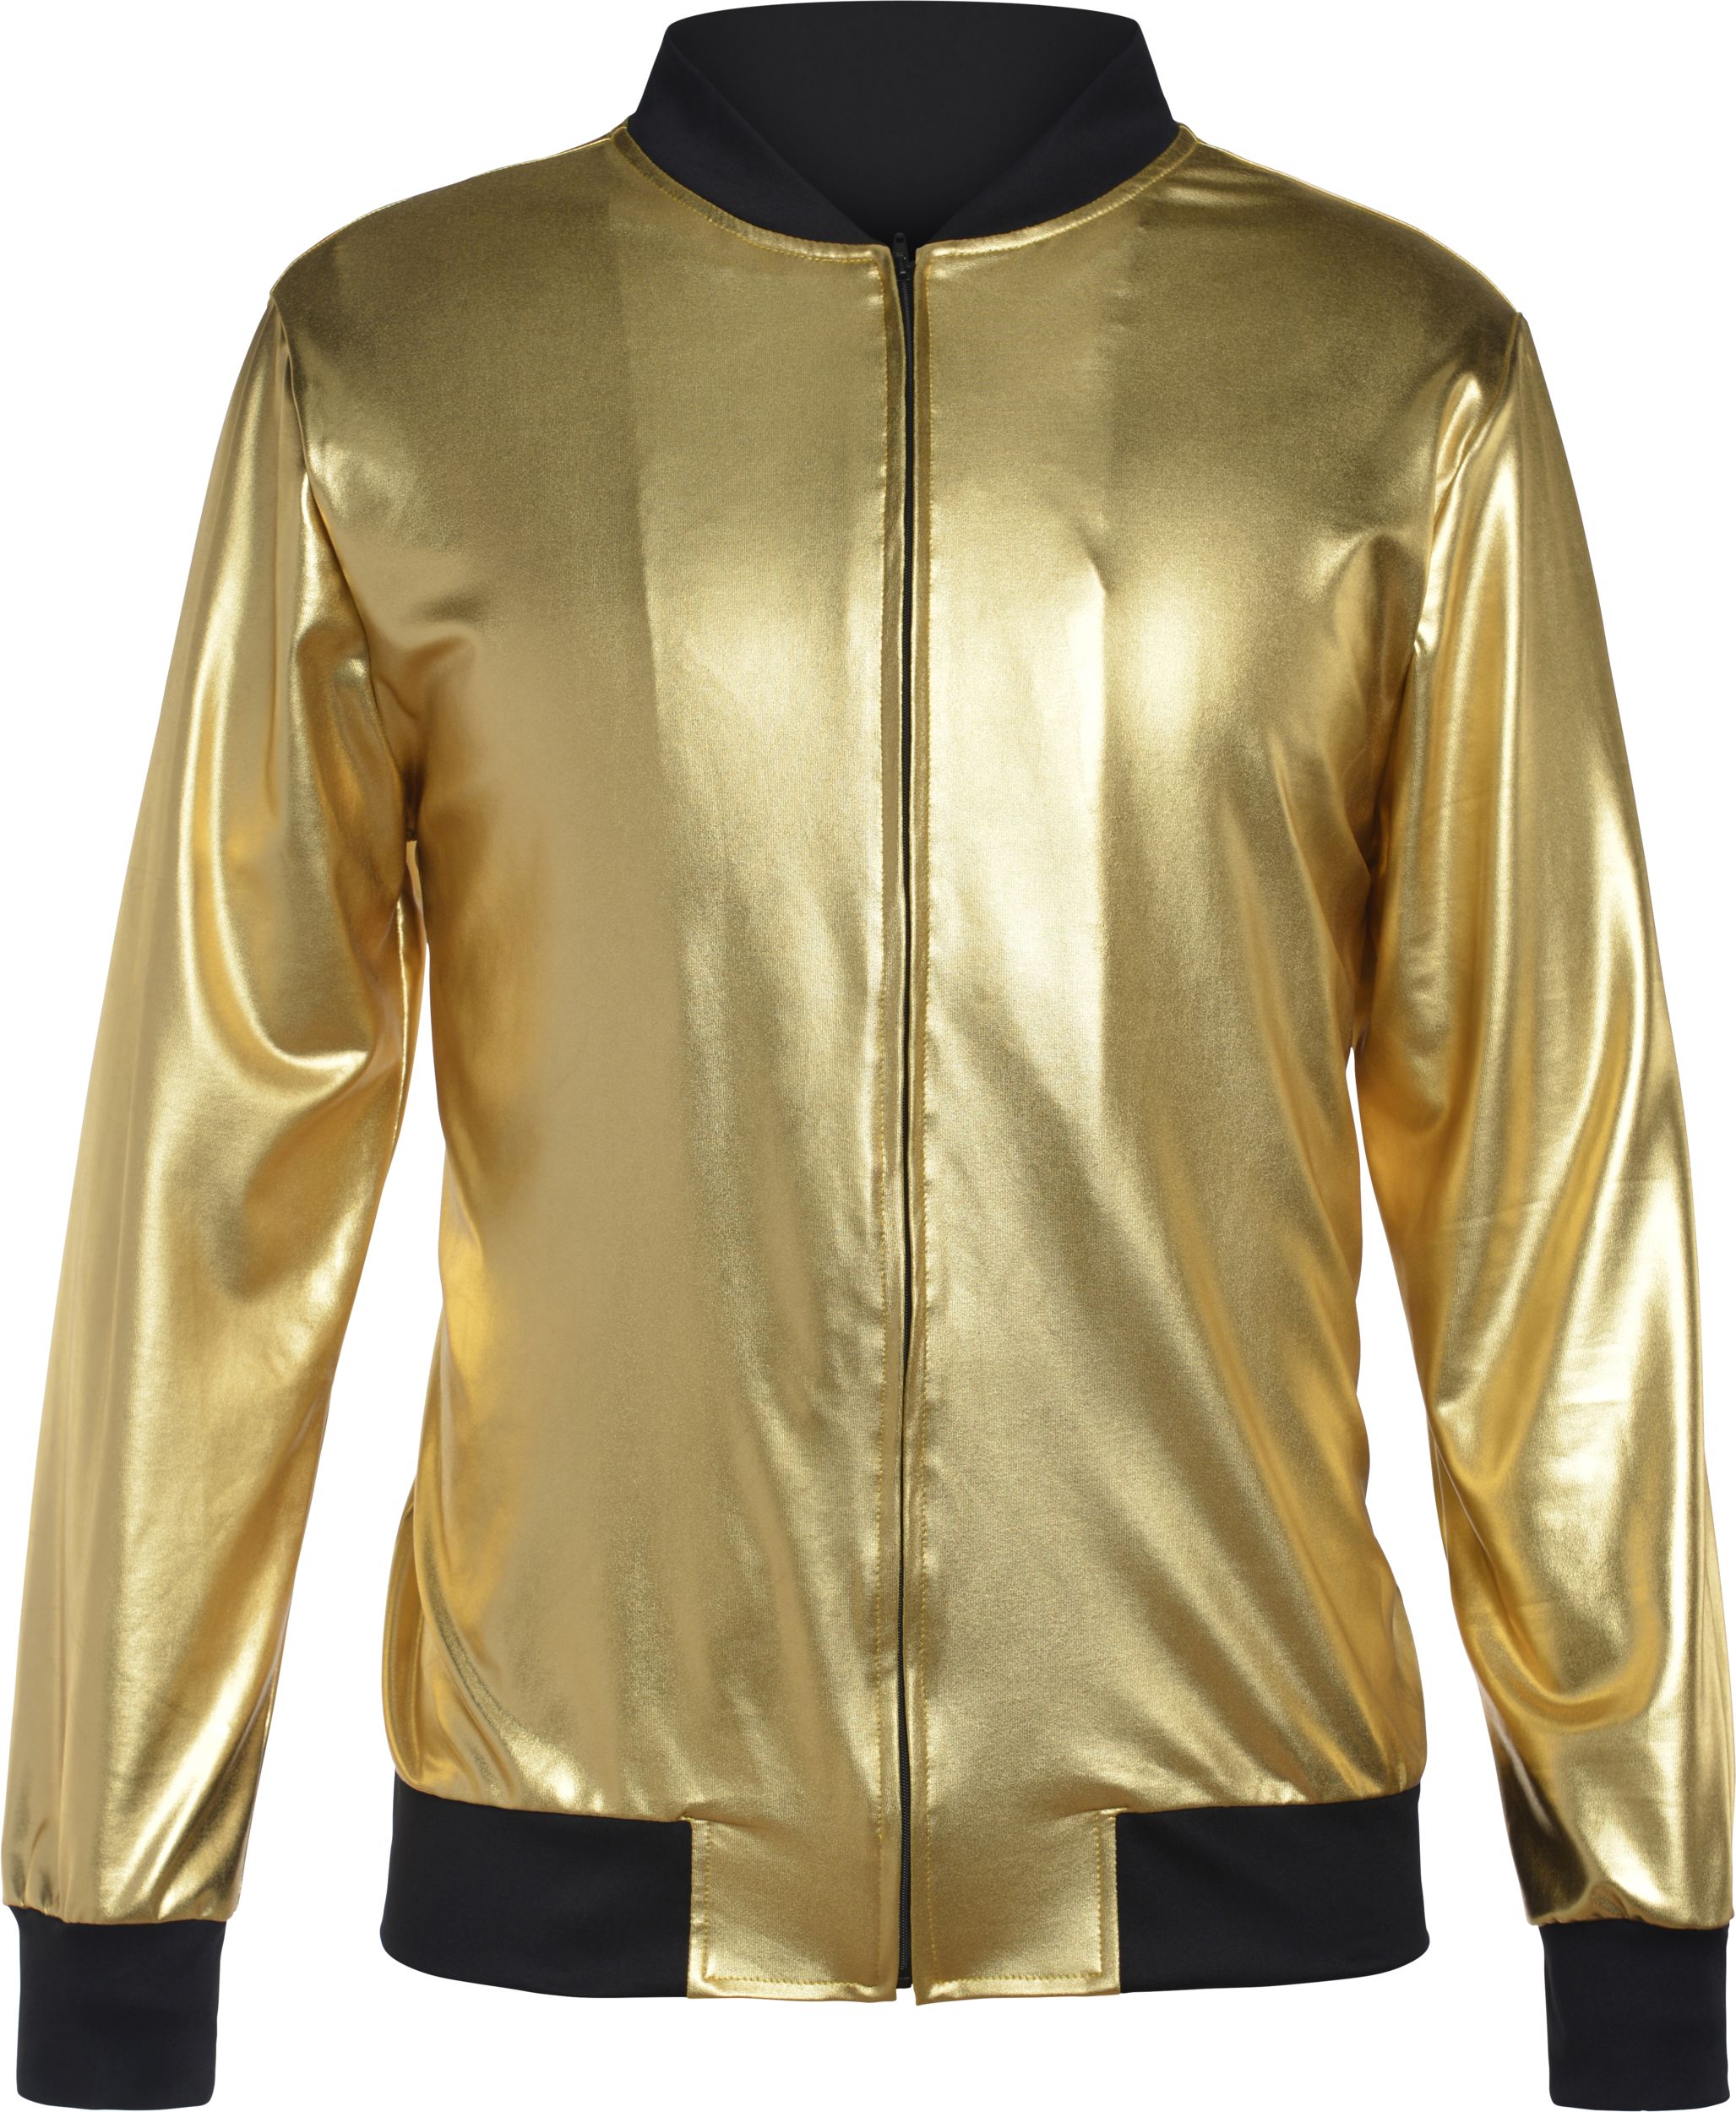 Adult Hip Hop Track Jacket, Gold, One Size, Wearable Costume Accessory for  Halloween